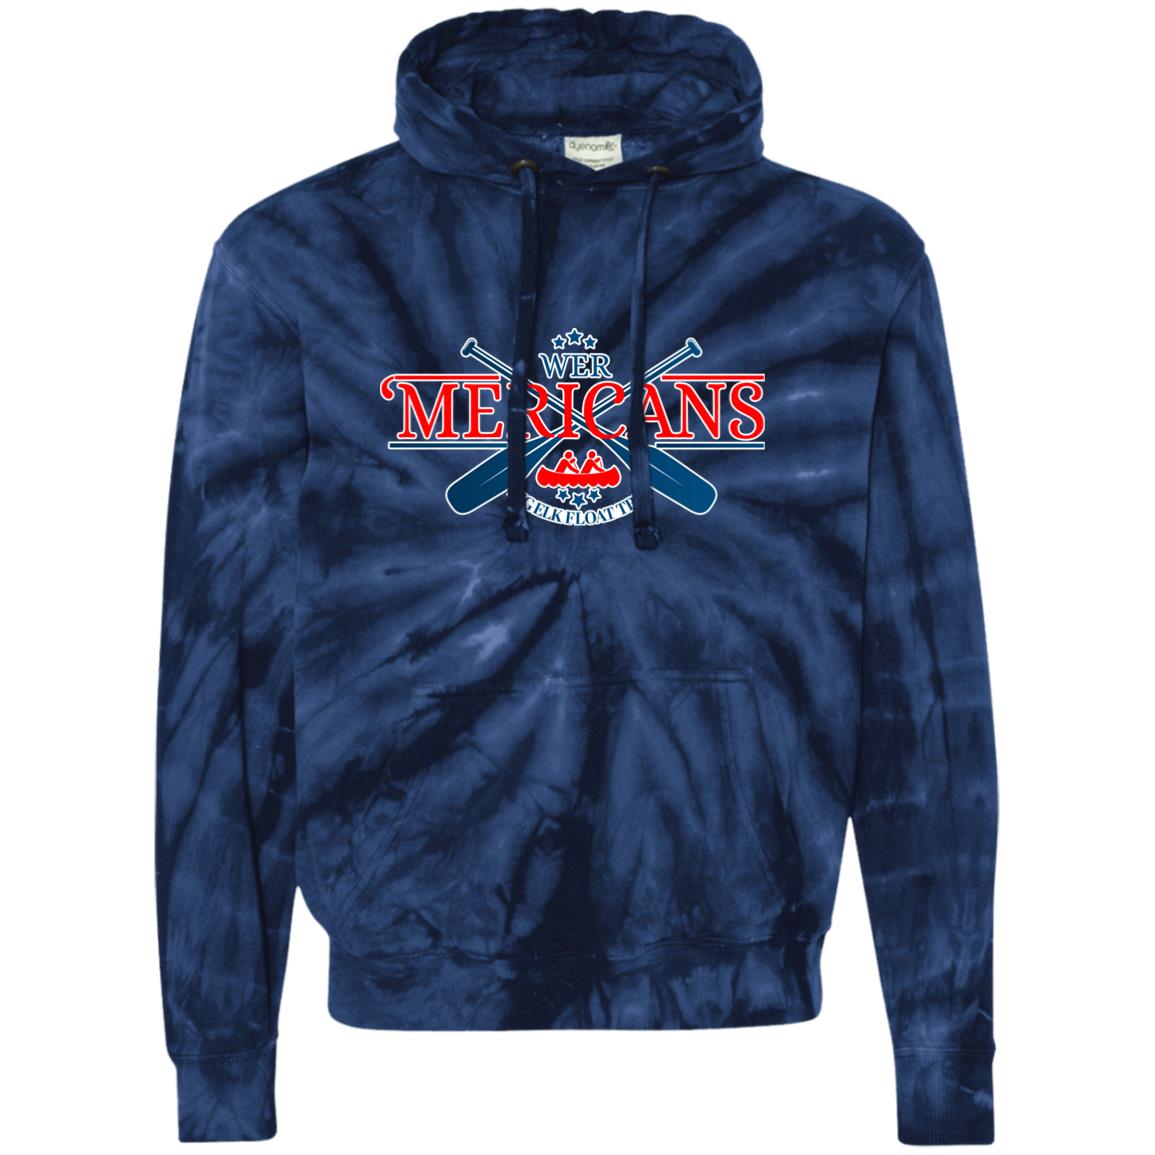 LIMITED EDITION 'Merican Unisex Tie-Dyed Pullover Hoodie - Expressive DeZien 